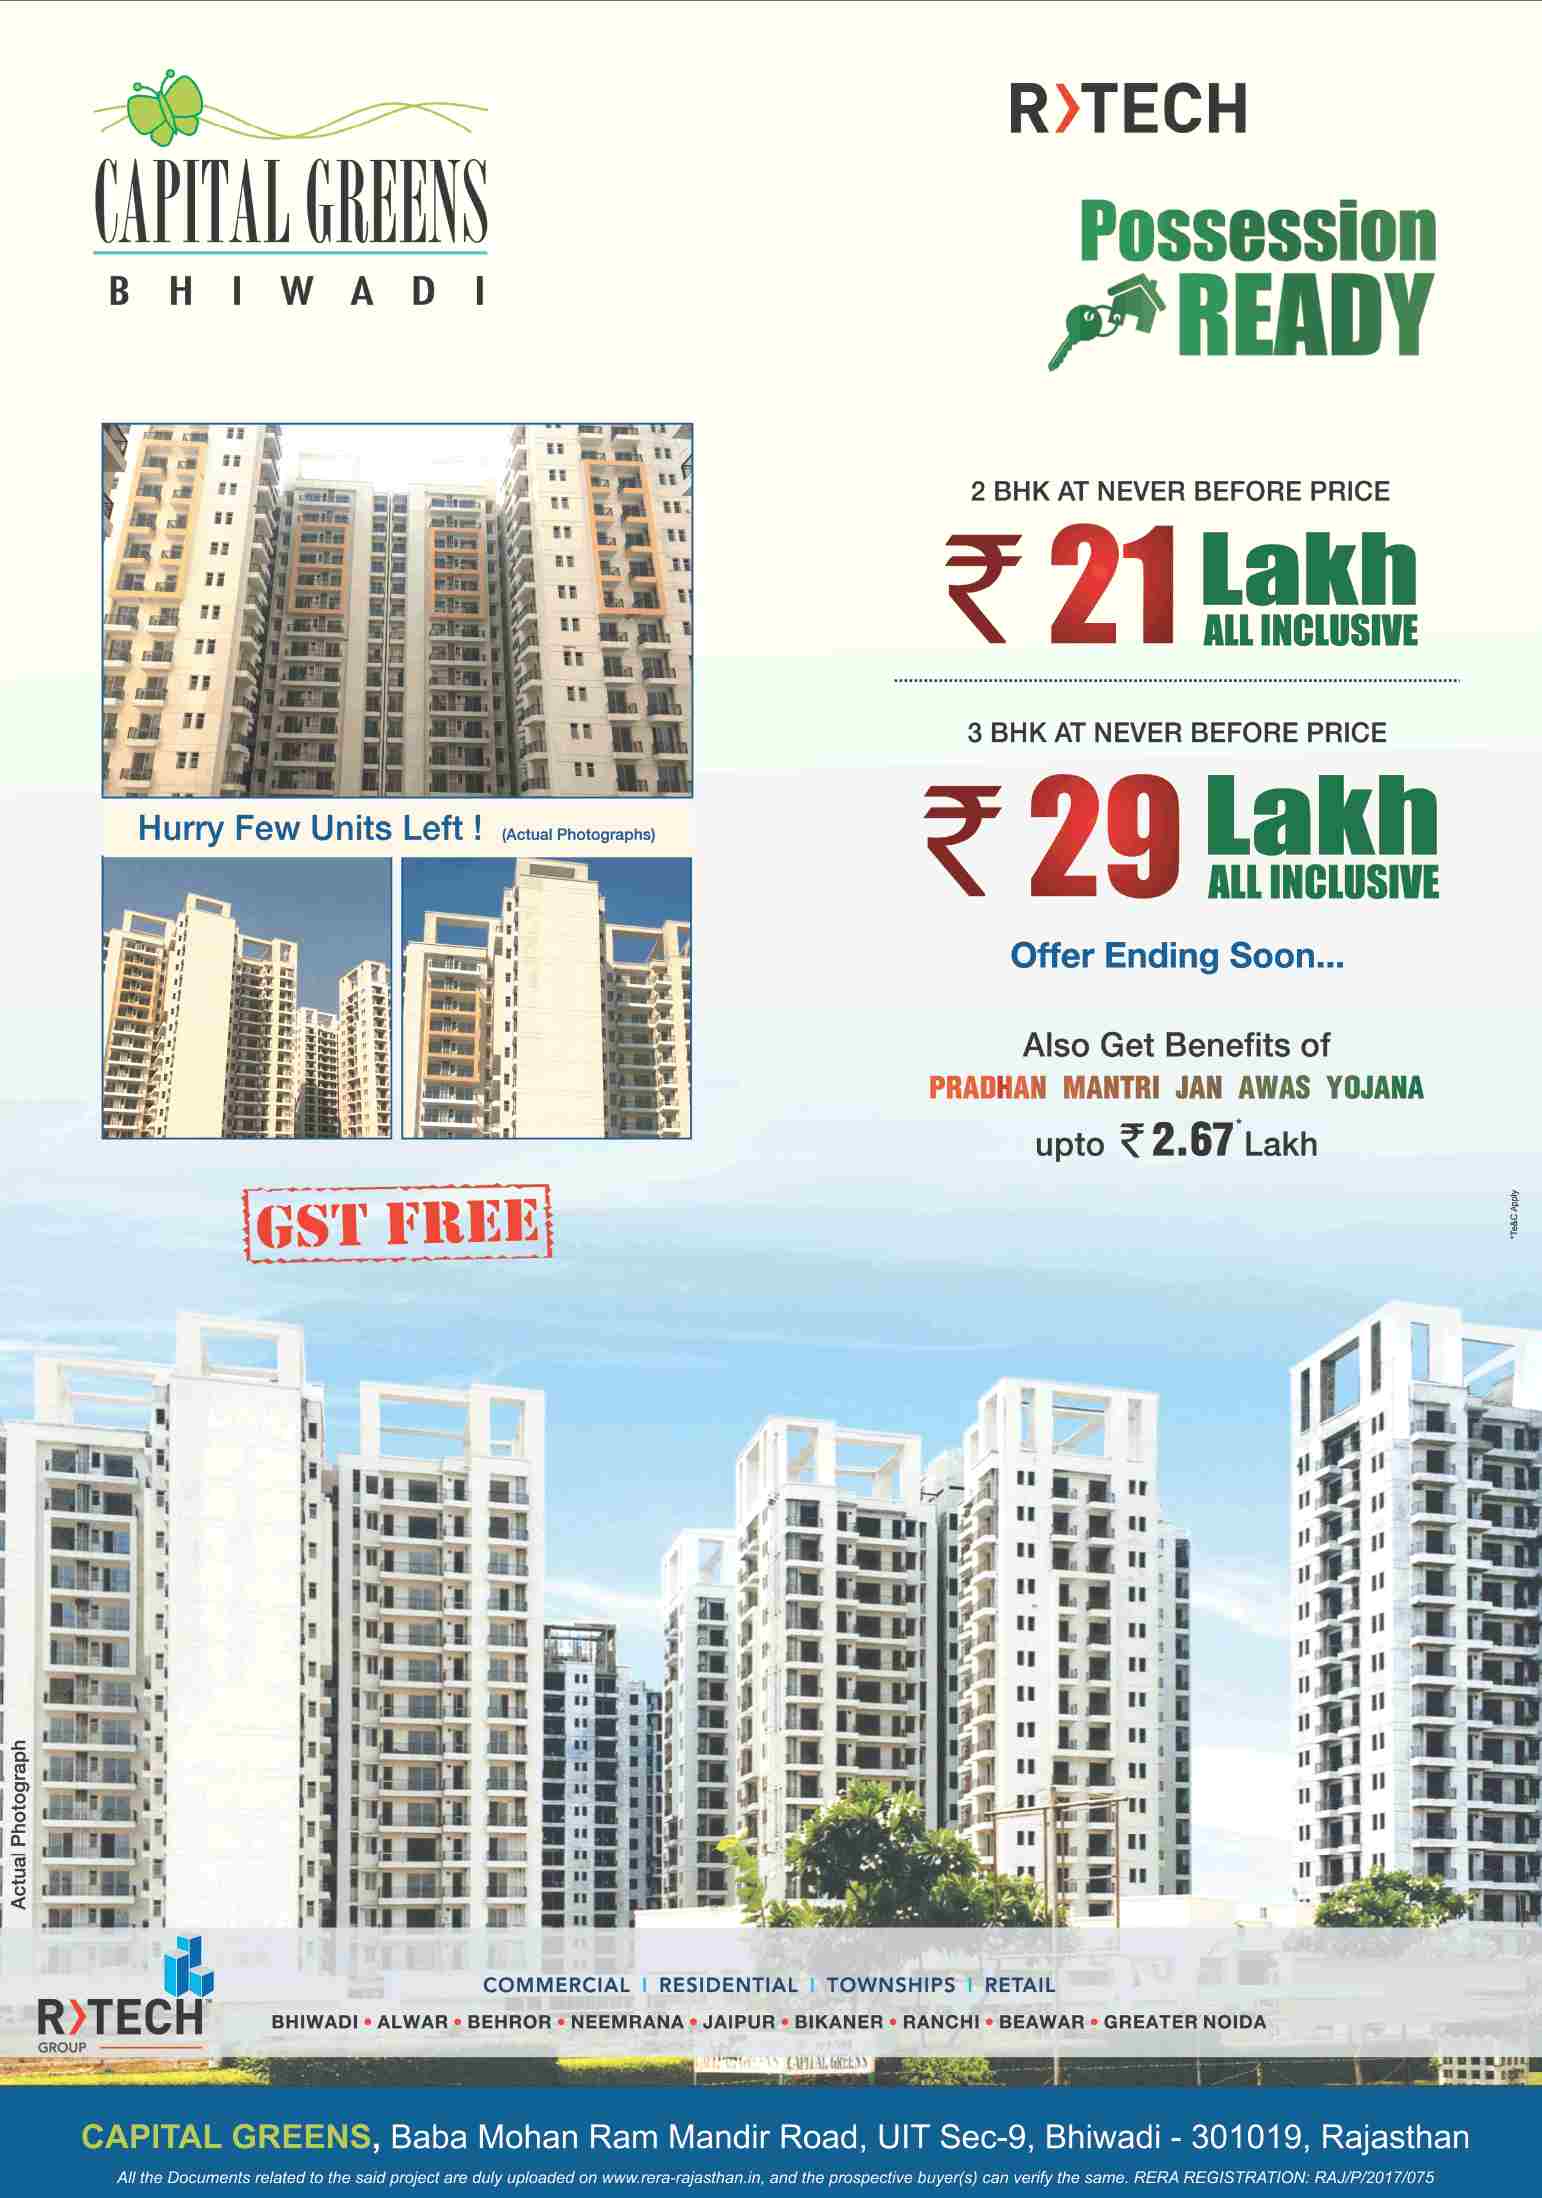 Live in ready possession homes at R Tech Capital Greens in Bhiwadi